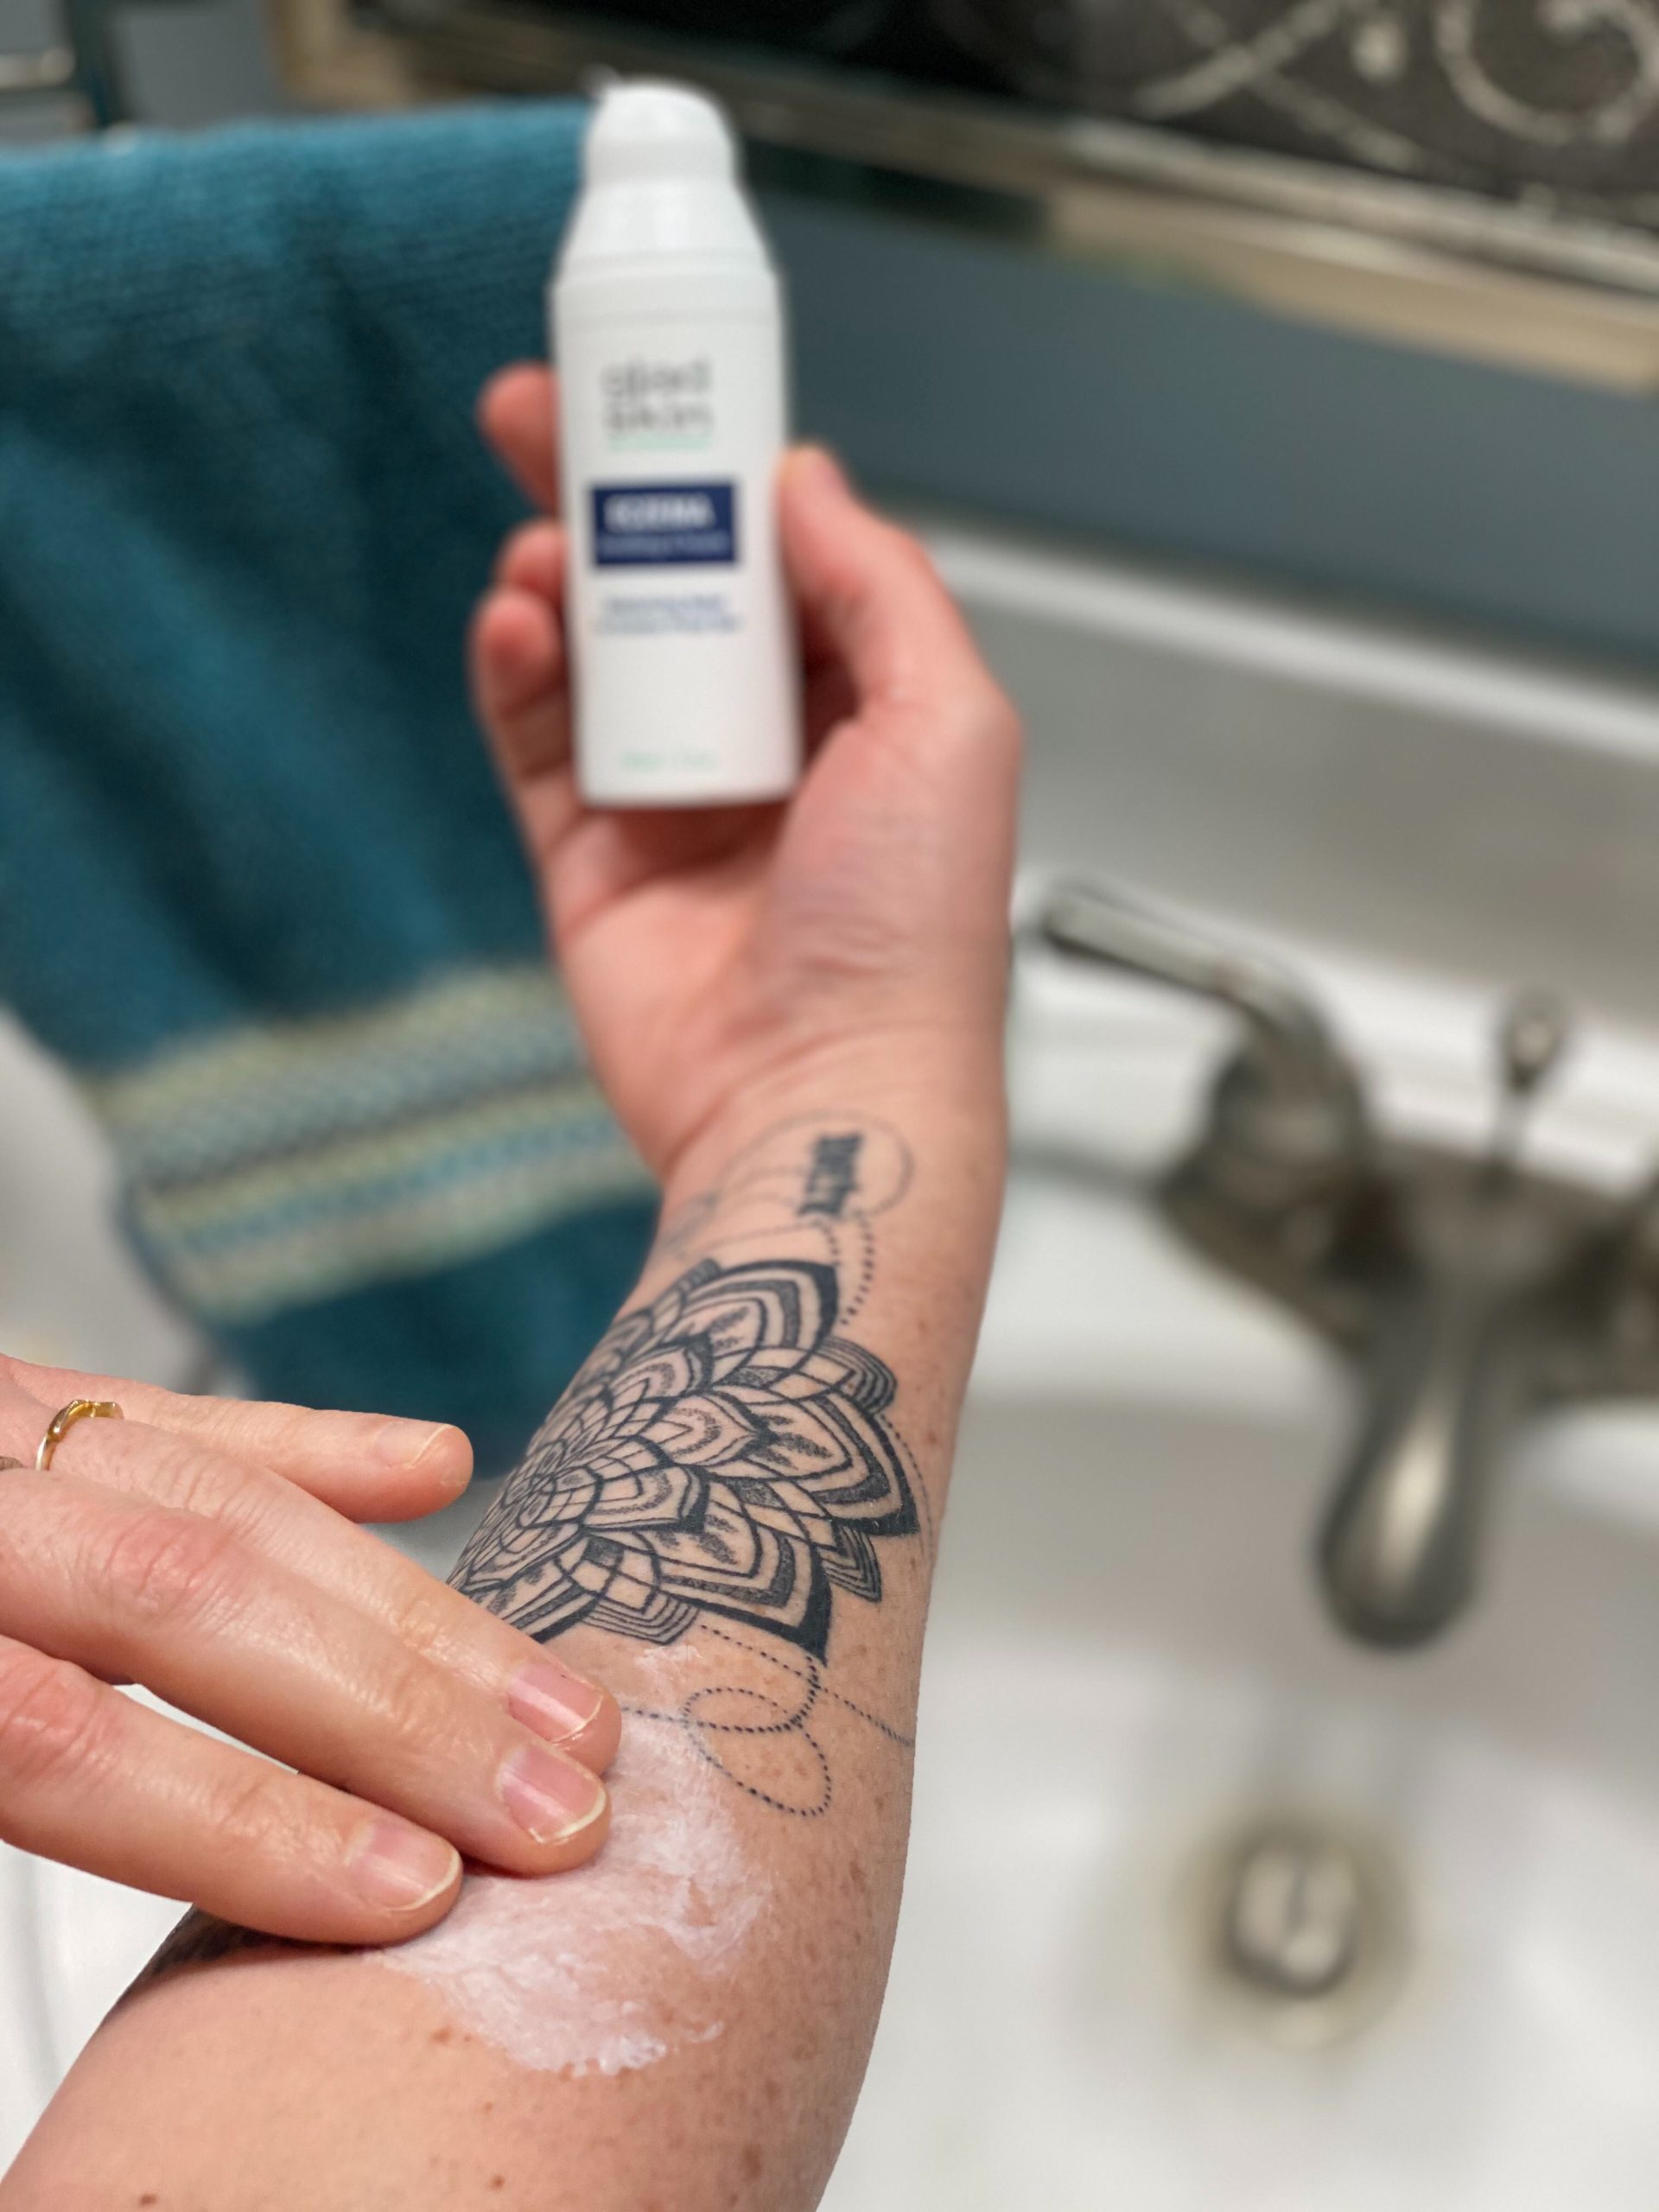 Gladskin provides quick eczema relief, without the harsh ingredients | sponsor